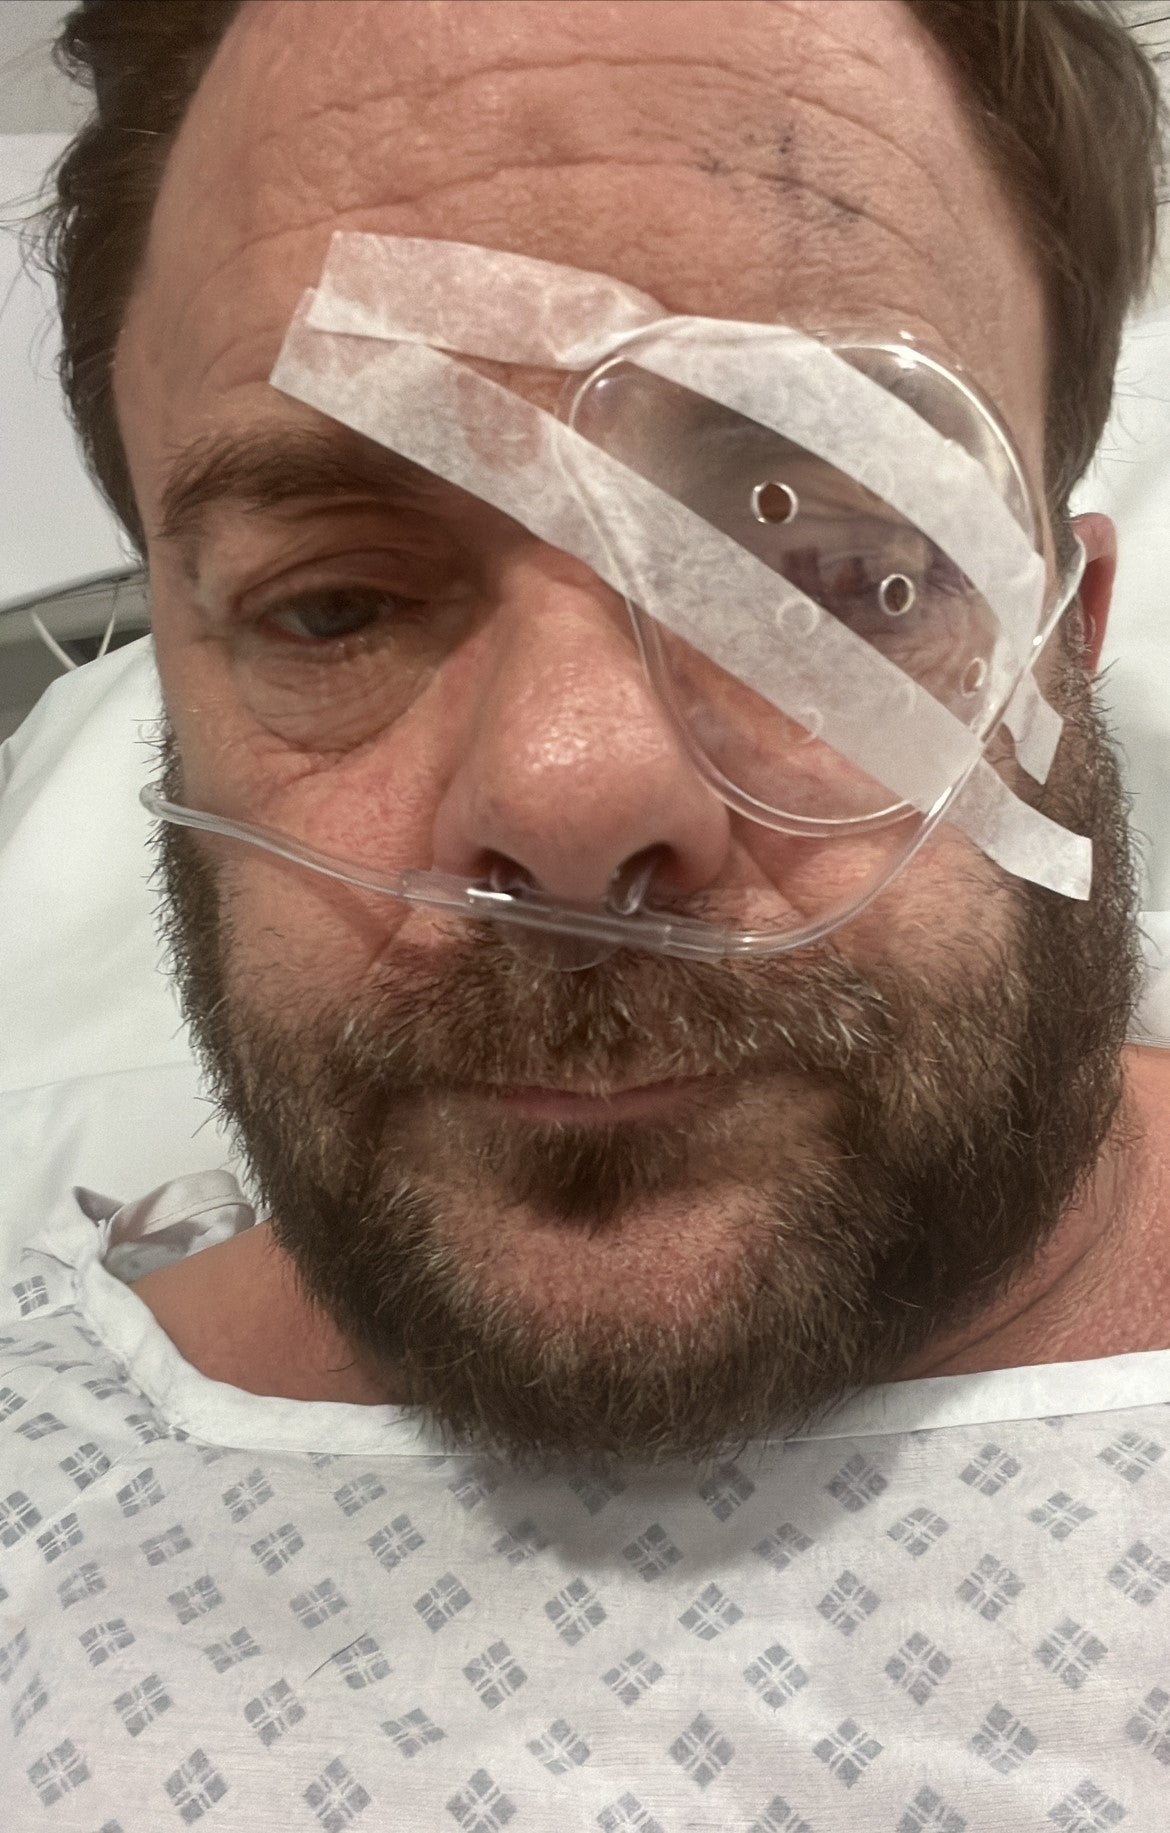 Spencer had his left eye “bolted” after the attack in Surbiton